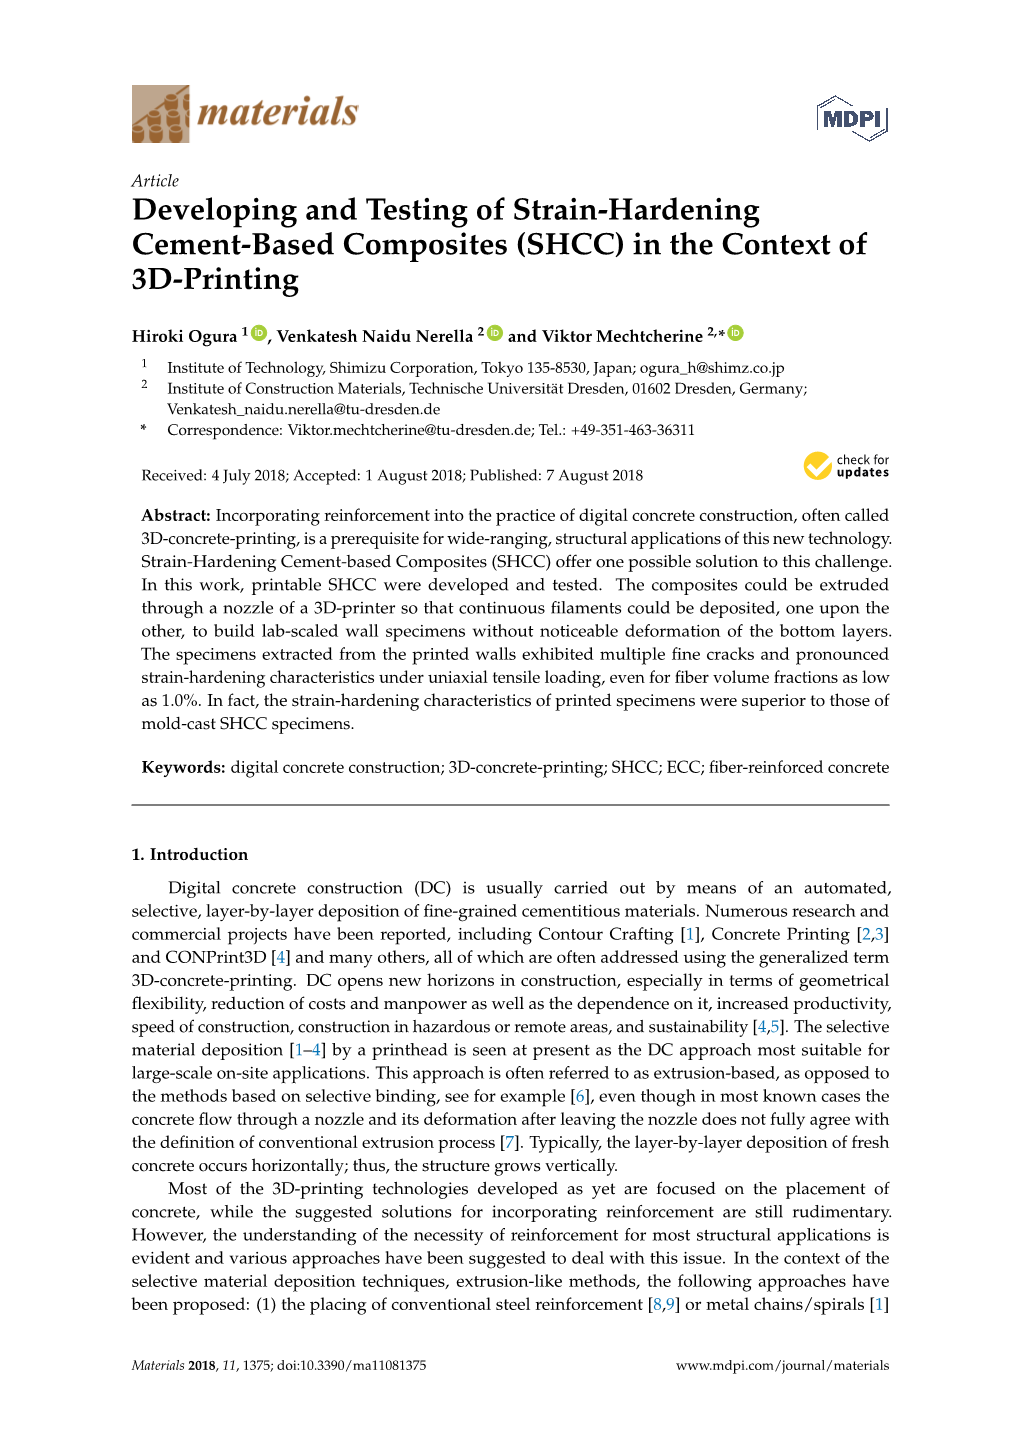 Developing and Testing of Strain-Hardening Cement-Based Composites (SHCC) in the Context of 3D-Printing